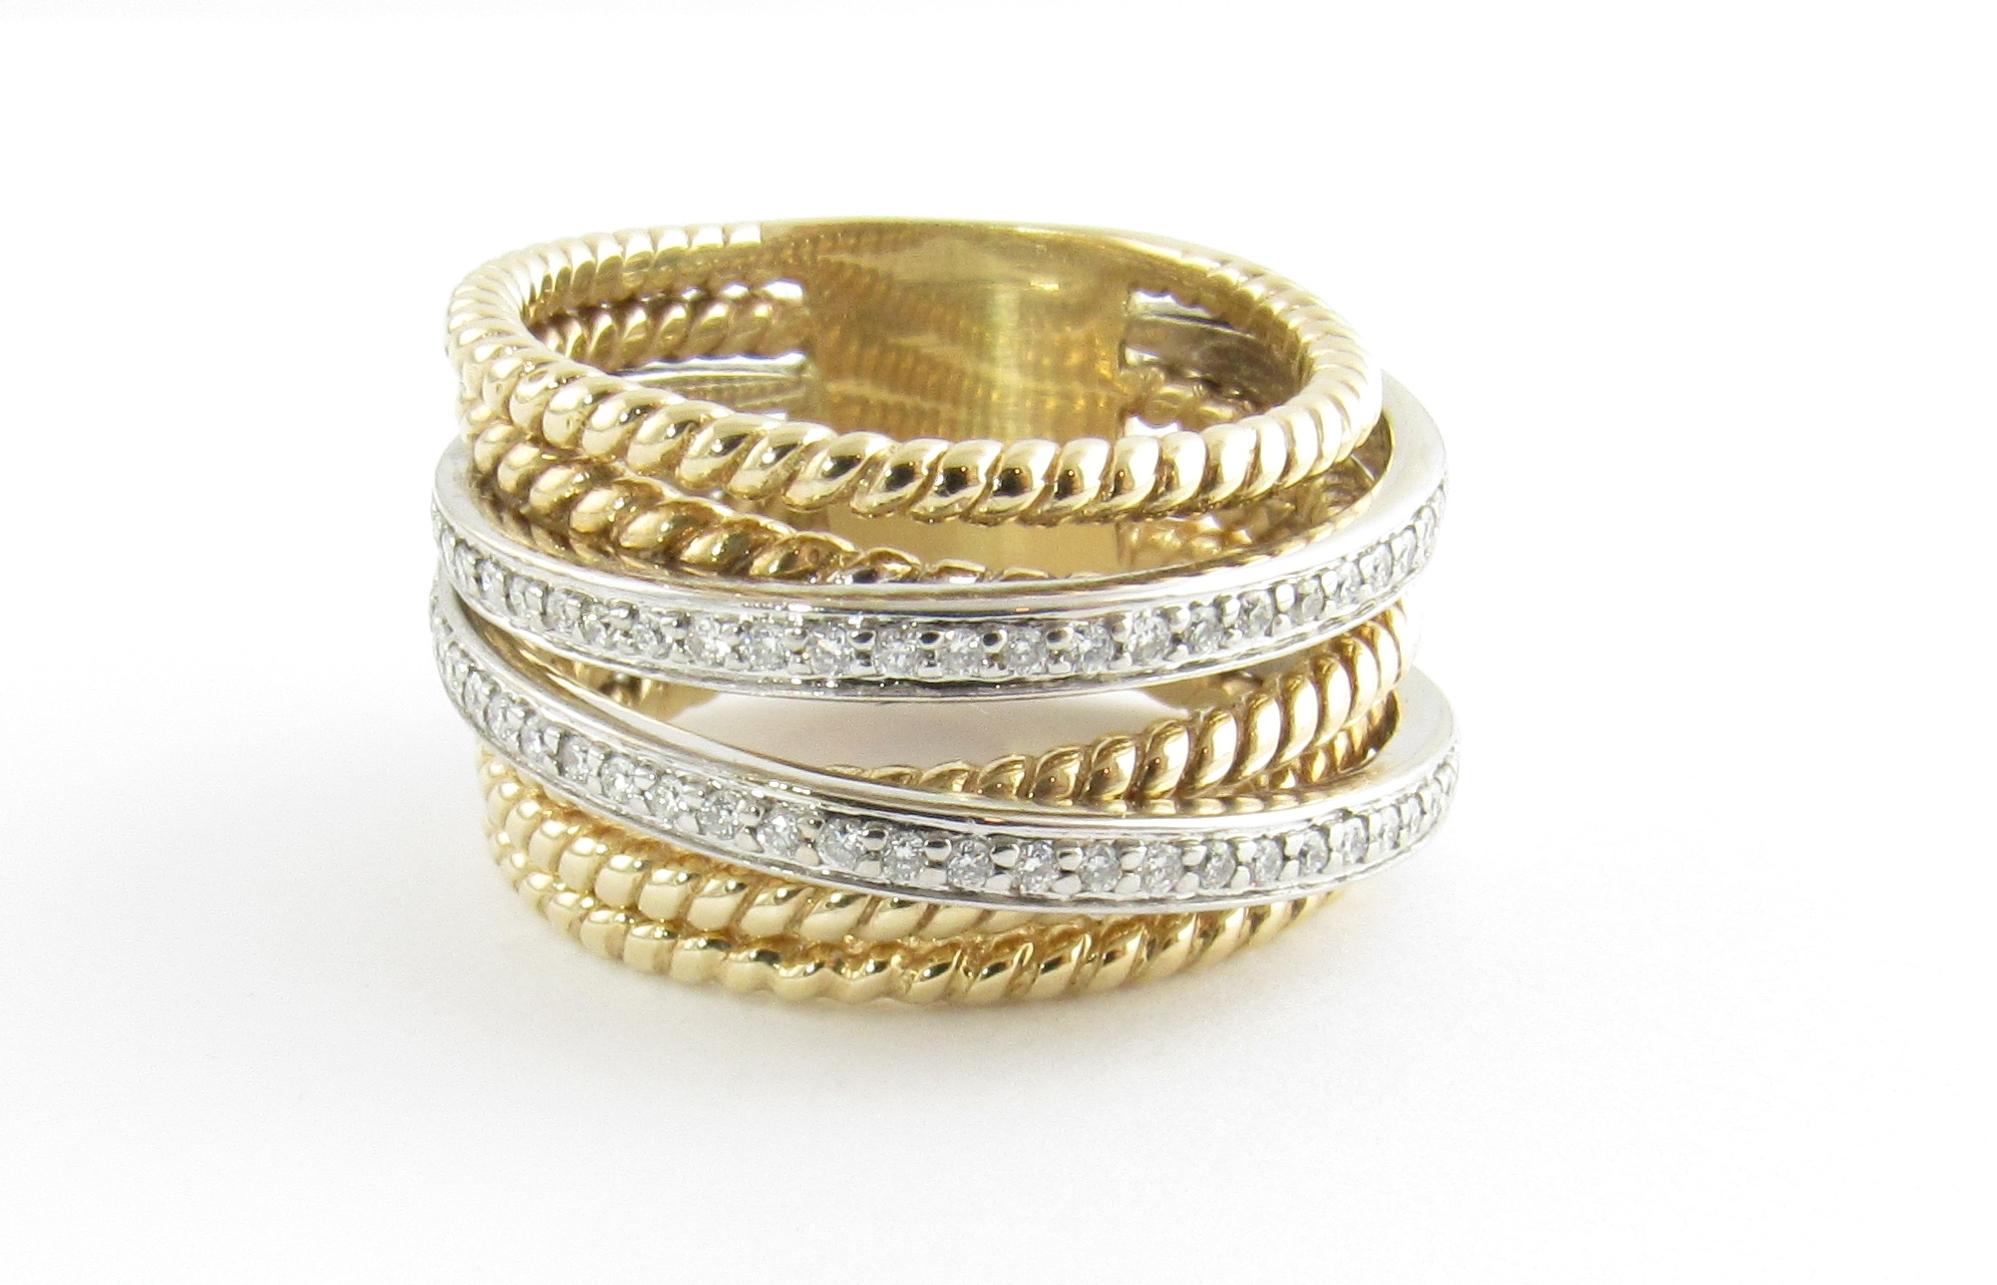 Vintage 14 Karat Yellow and White Gold Diamond Multi-Band Ring Size 7.5-

This stunning multi-band ring features 52 round brilliant cut diamonds set in beautifully detailed 14K white and yellow gold. Width: 12 mm.

Approximate total diamond weight: